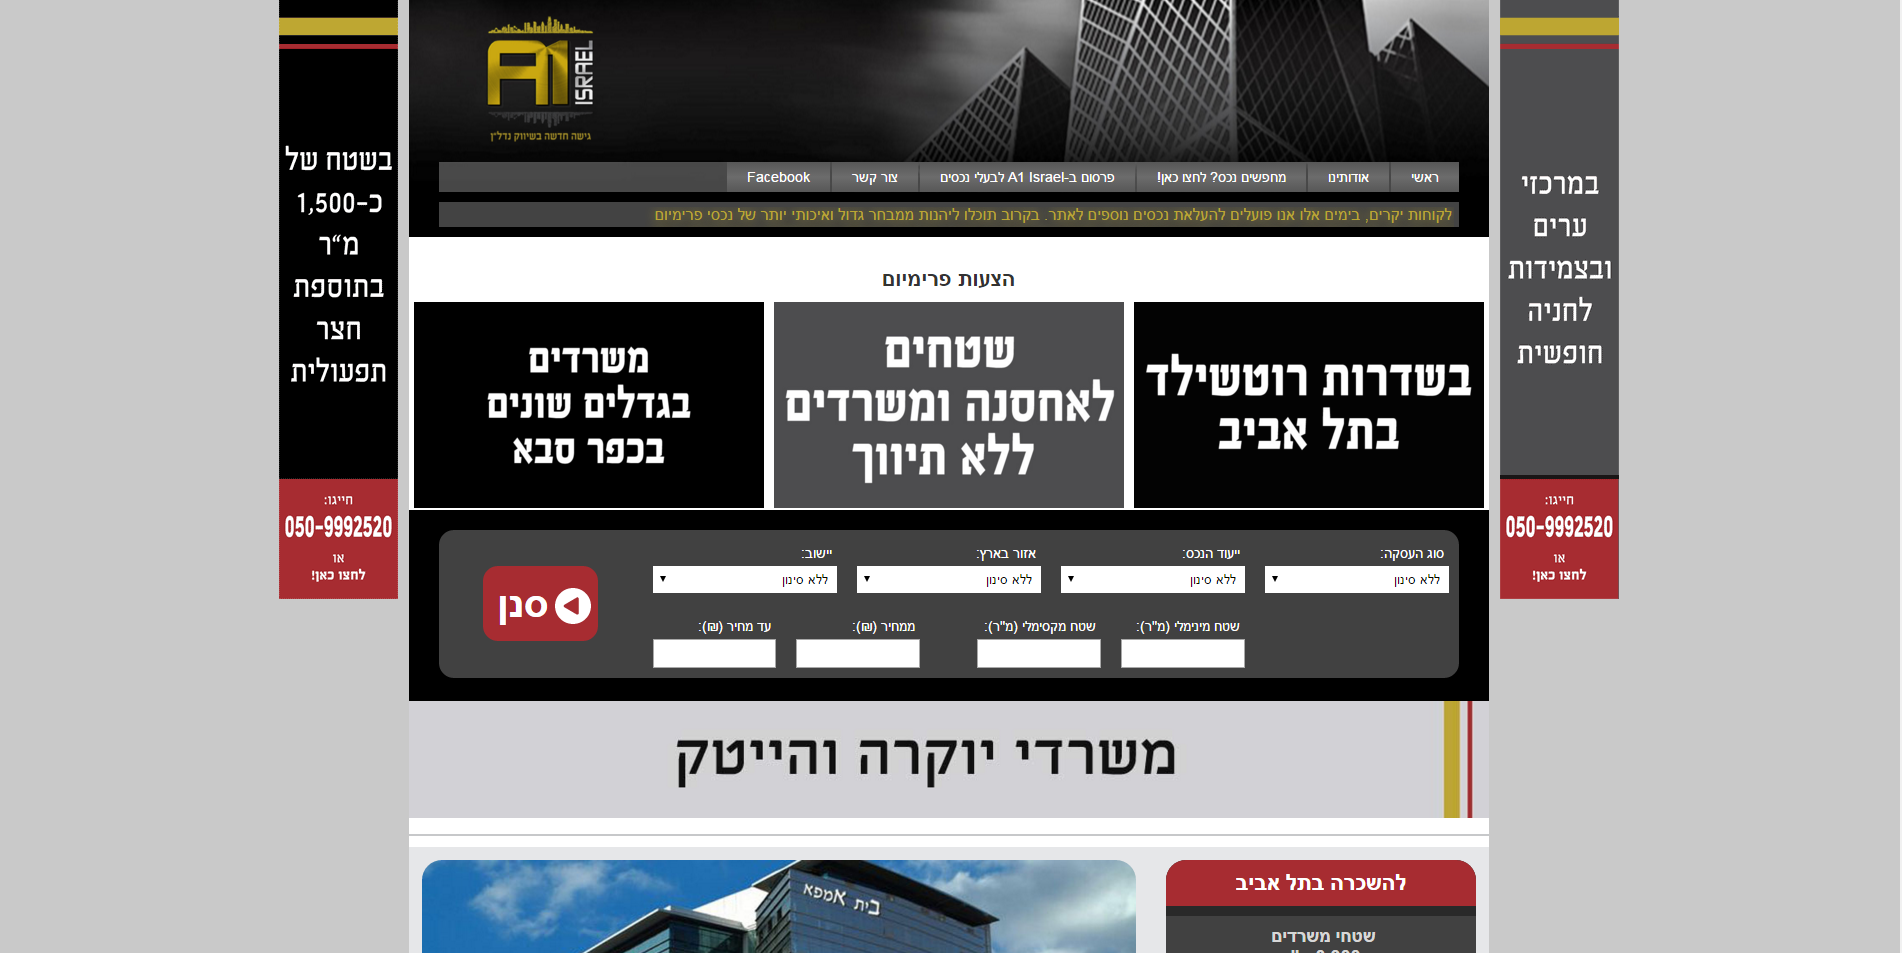 a1israel.co.il